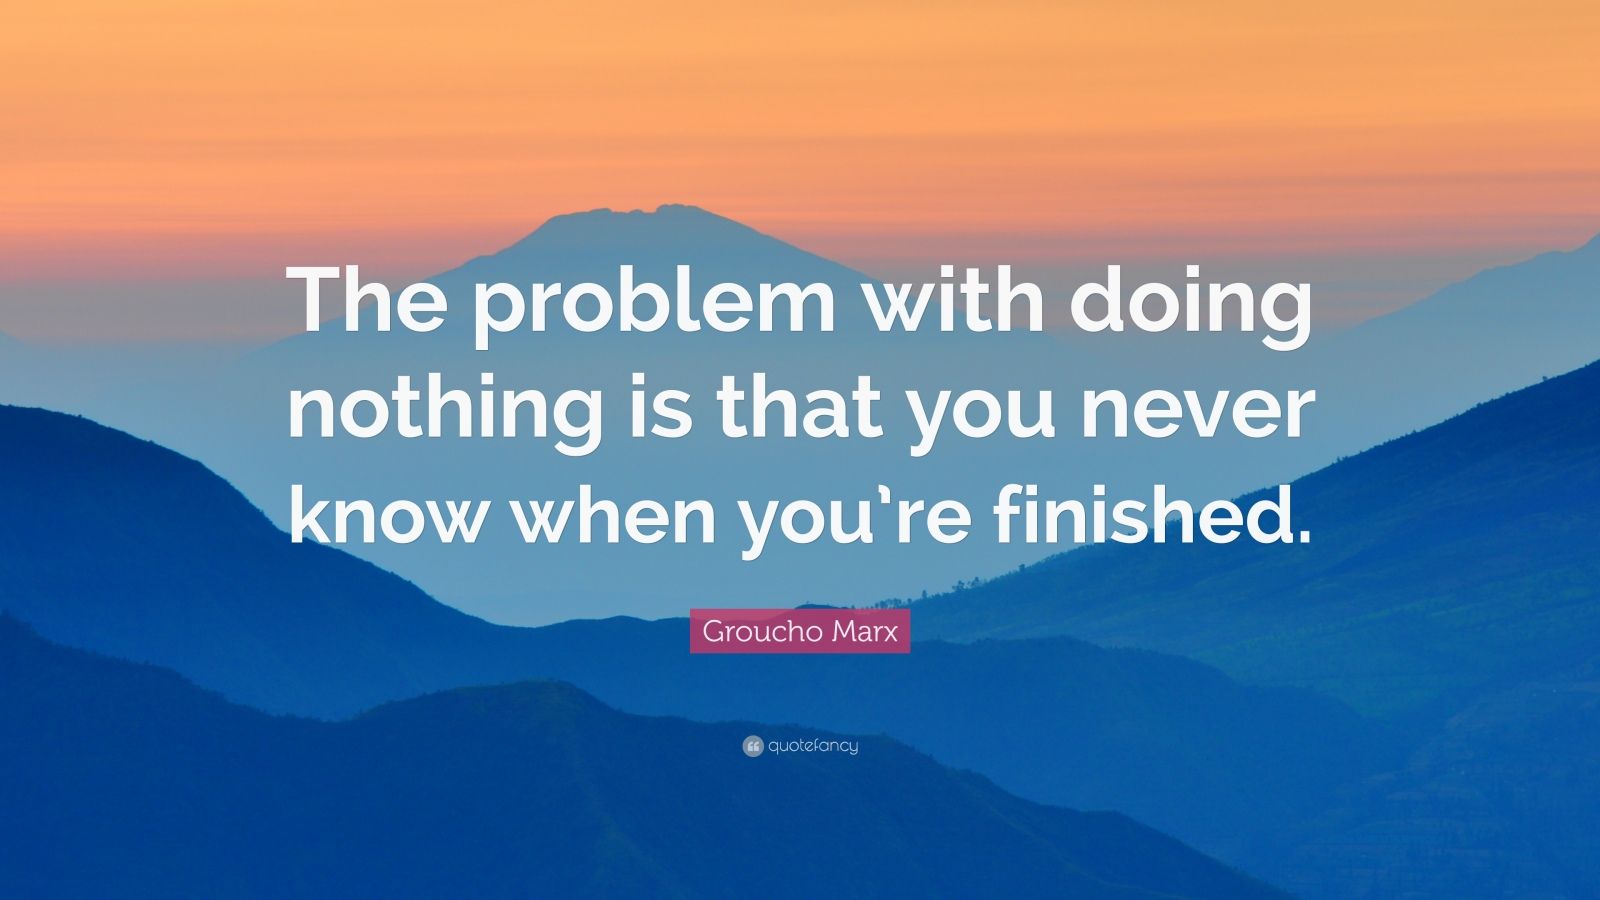 Groucho Marx Quote: “The problem with doing nothing is that you never ...